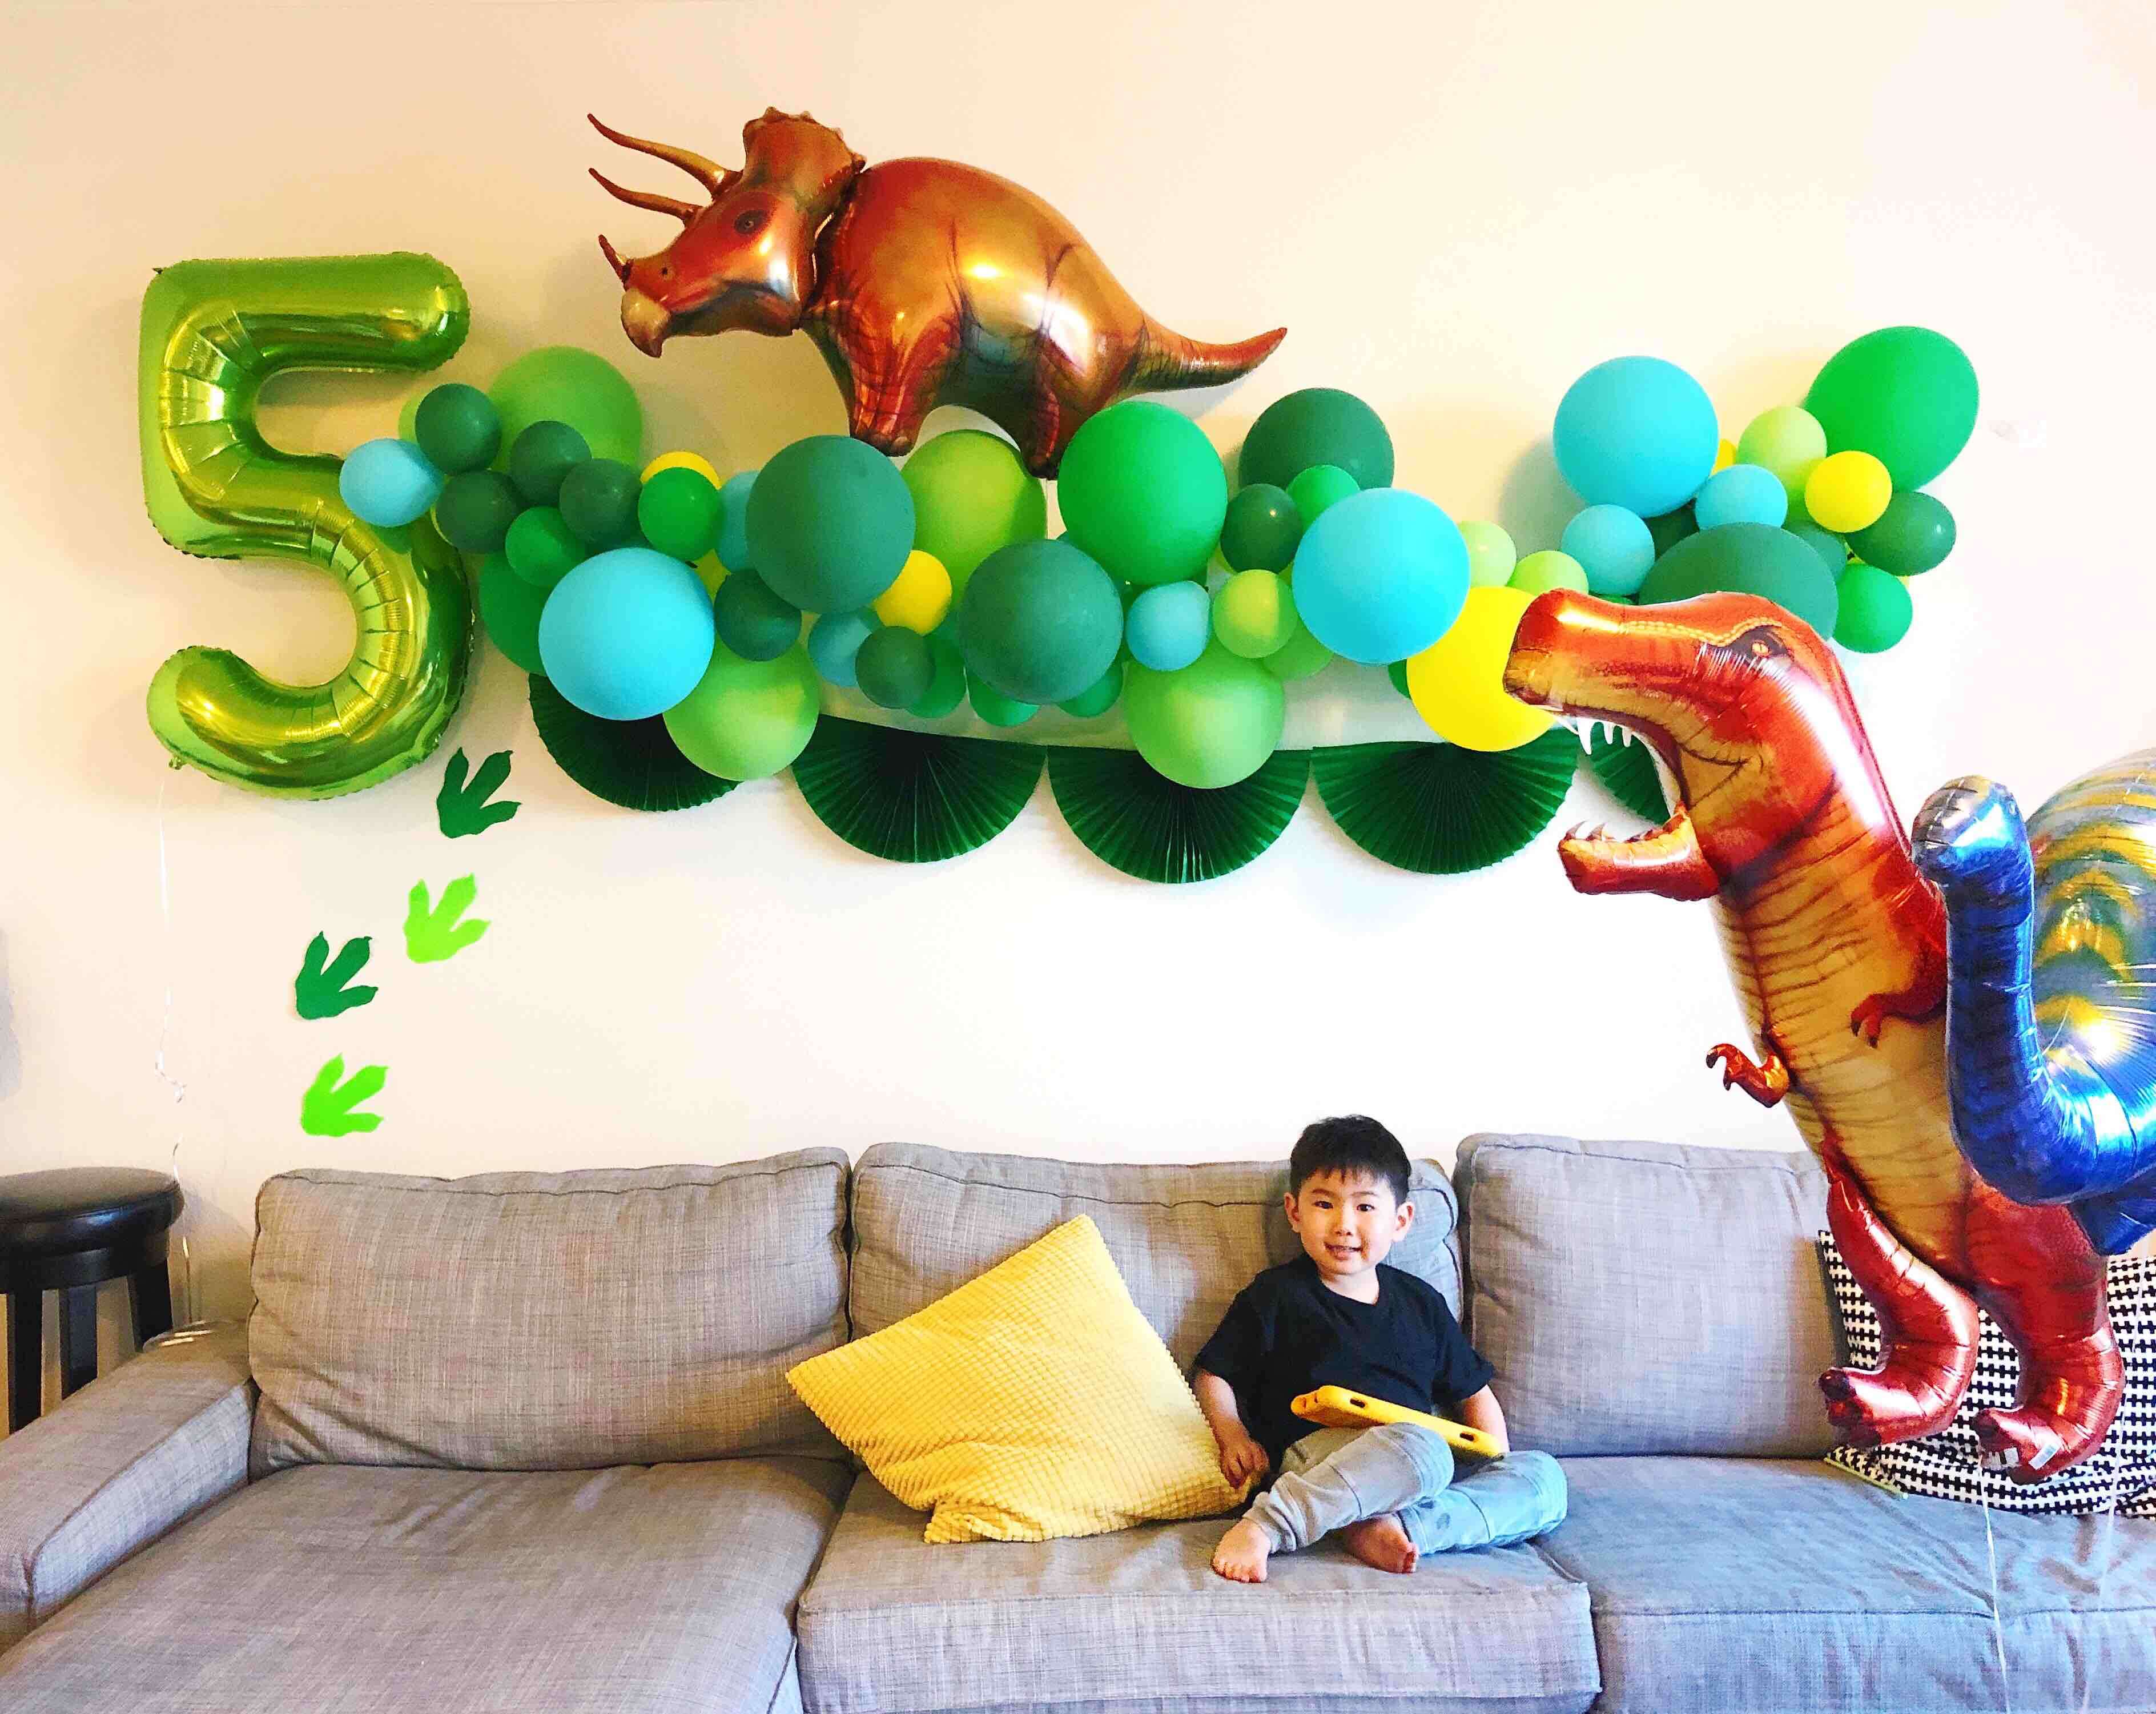 Safe at home Shelter in place ideas for Kids virtual birthday party at home 